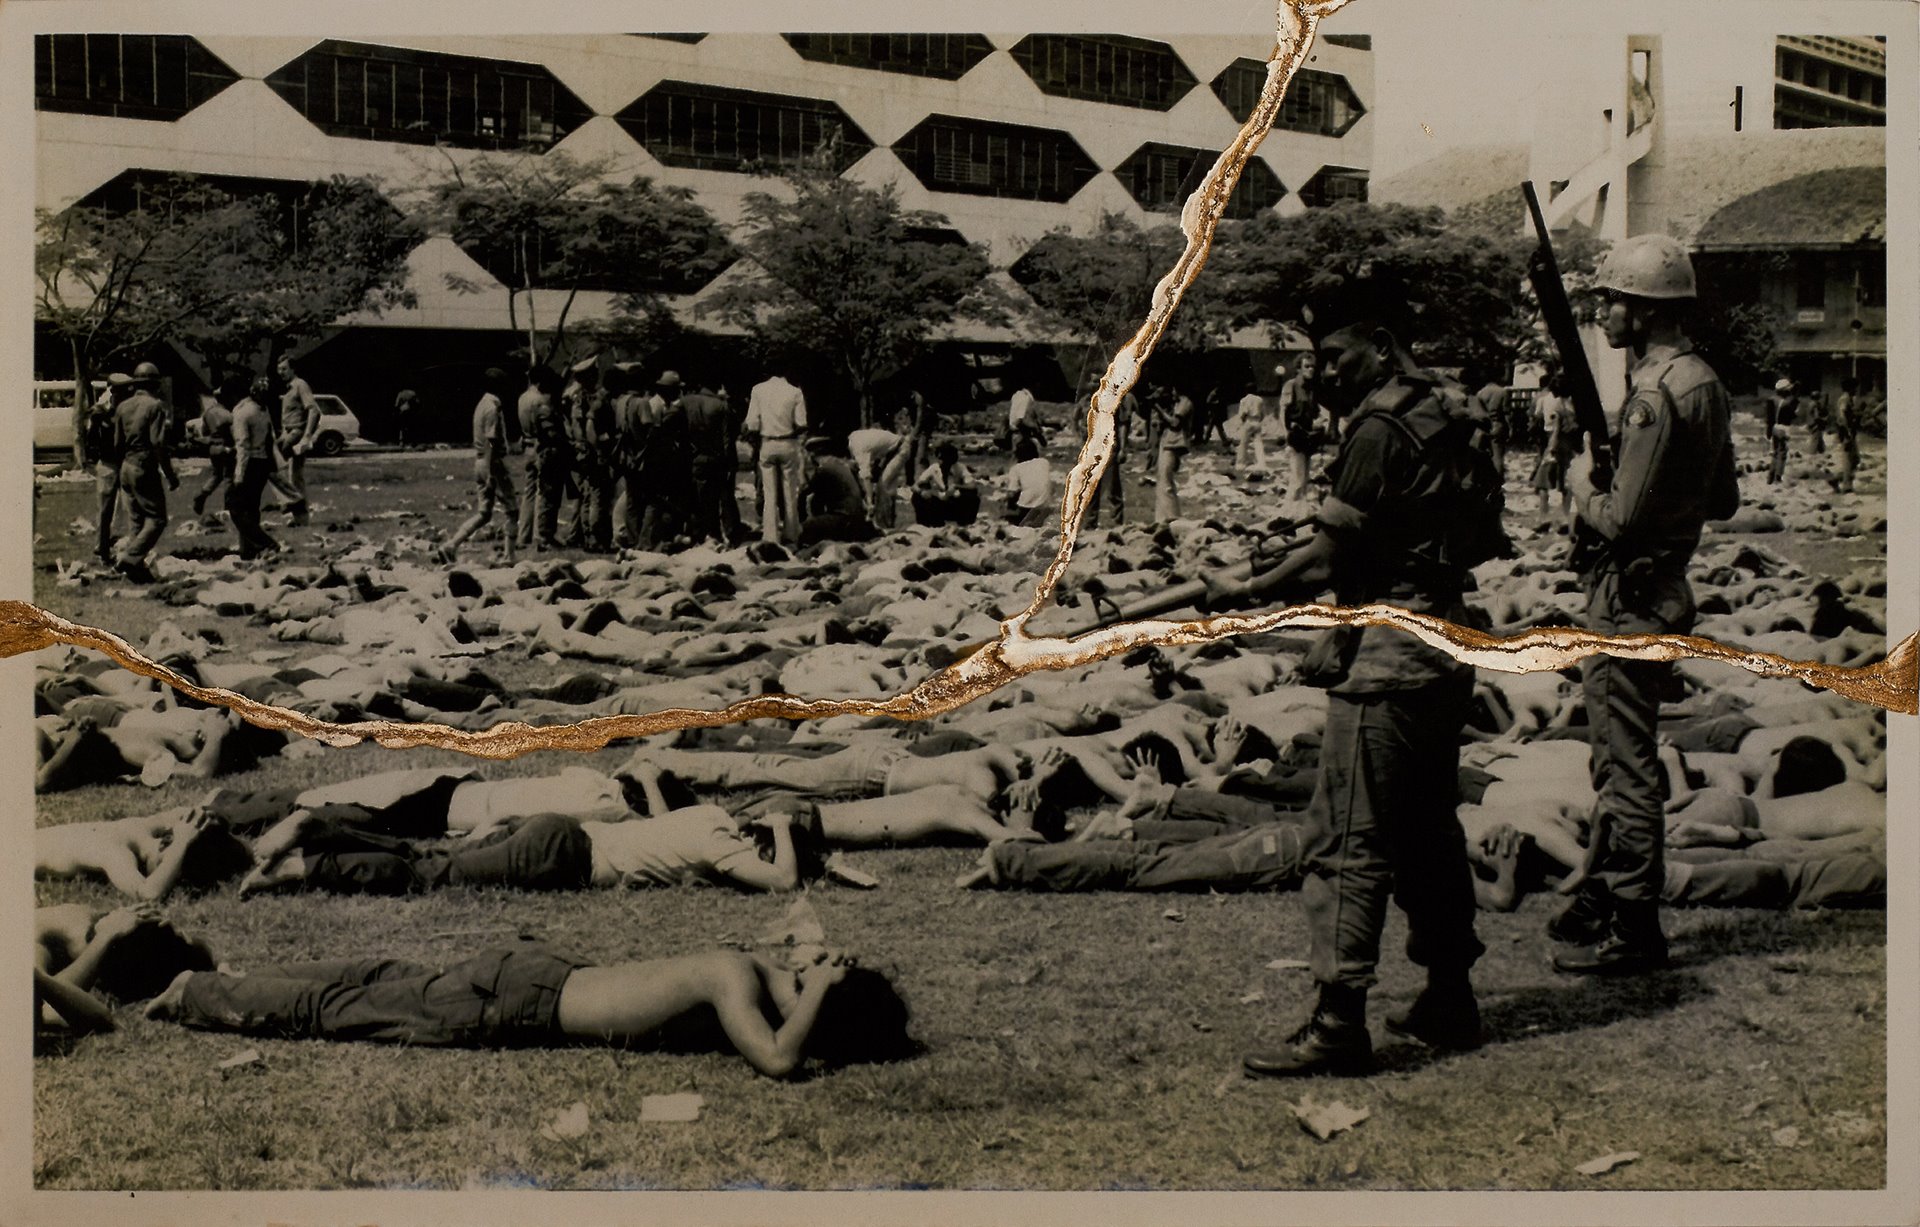 <p>Archive image of the 6 October 1976 massacre in Bangkok, Thailand. Thongchai Winichakul, the student leader at the time of the massacre, reports that he saw people lying on the ground, not realizing that some of them were dead. He kept repeating the same thing over and over: &ldquo;Please stop shooting. We have no weapons.&rdquo;</p>
